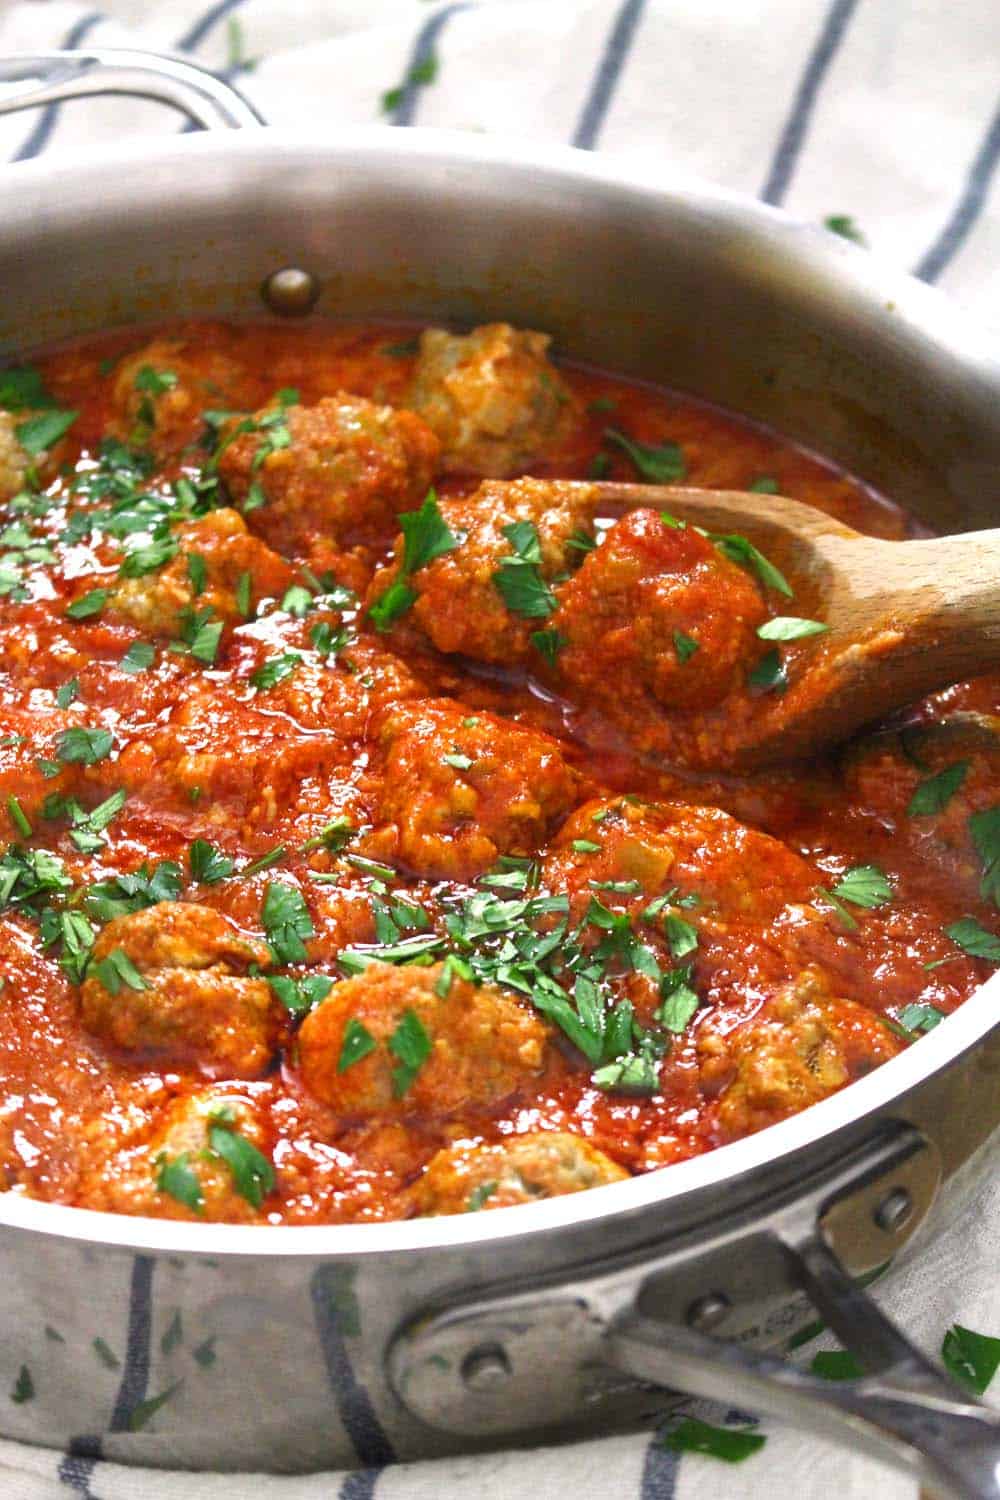 Tomato sauce and meatballs in a metal skillet, with a wooden spoon perched on the edge.